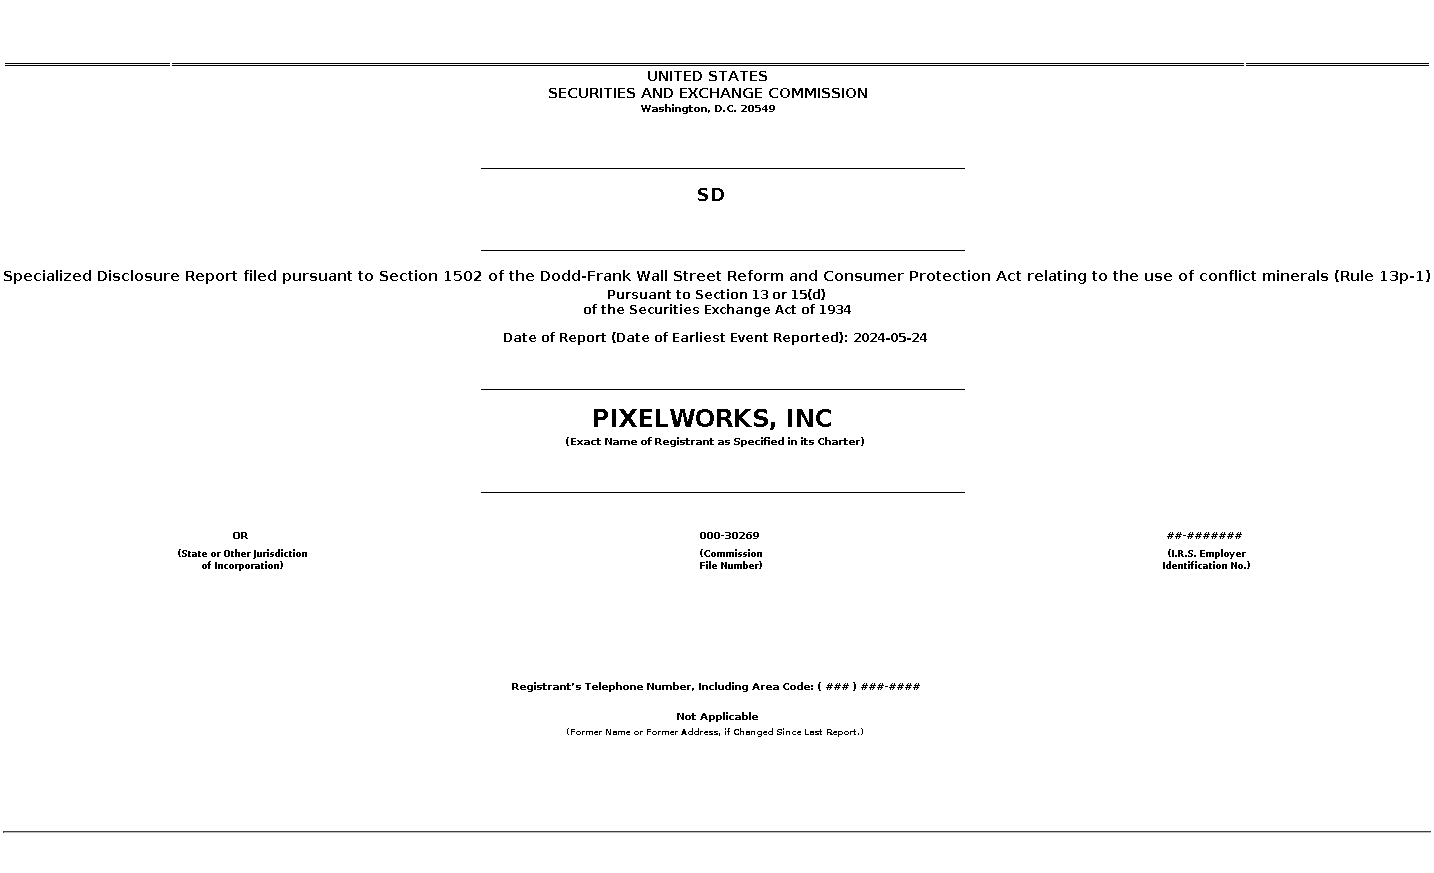 PXLW : SD Specialized Disclosure Report filed pursuant to Section 1502 of the Dodd-Frank Wall Street Reform and Consumer Protection Act relating to the use of conflict minerals (Rule 13p-1)